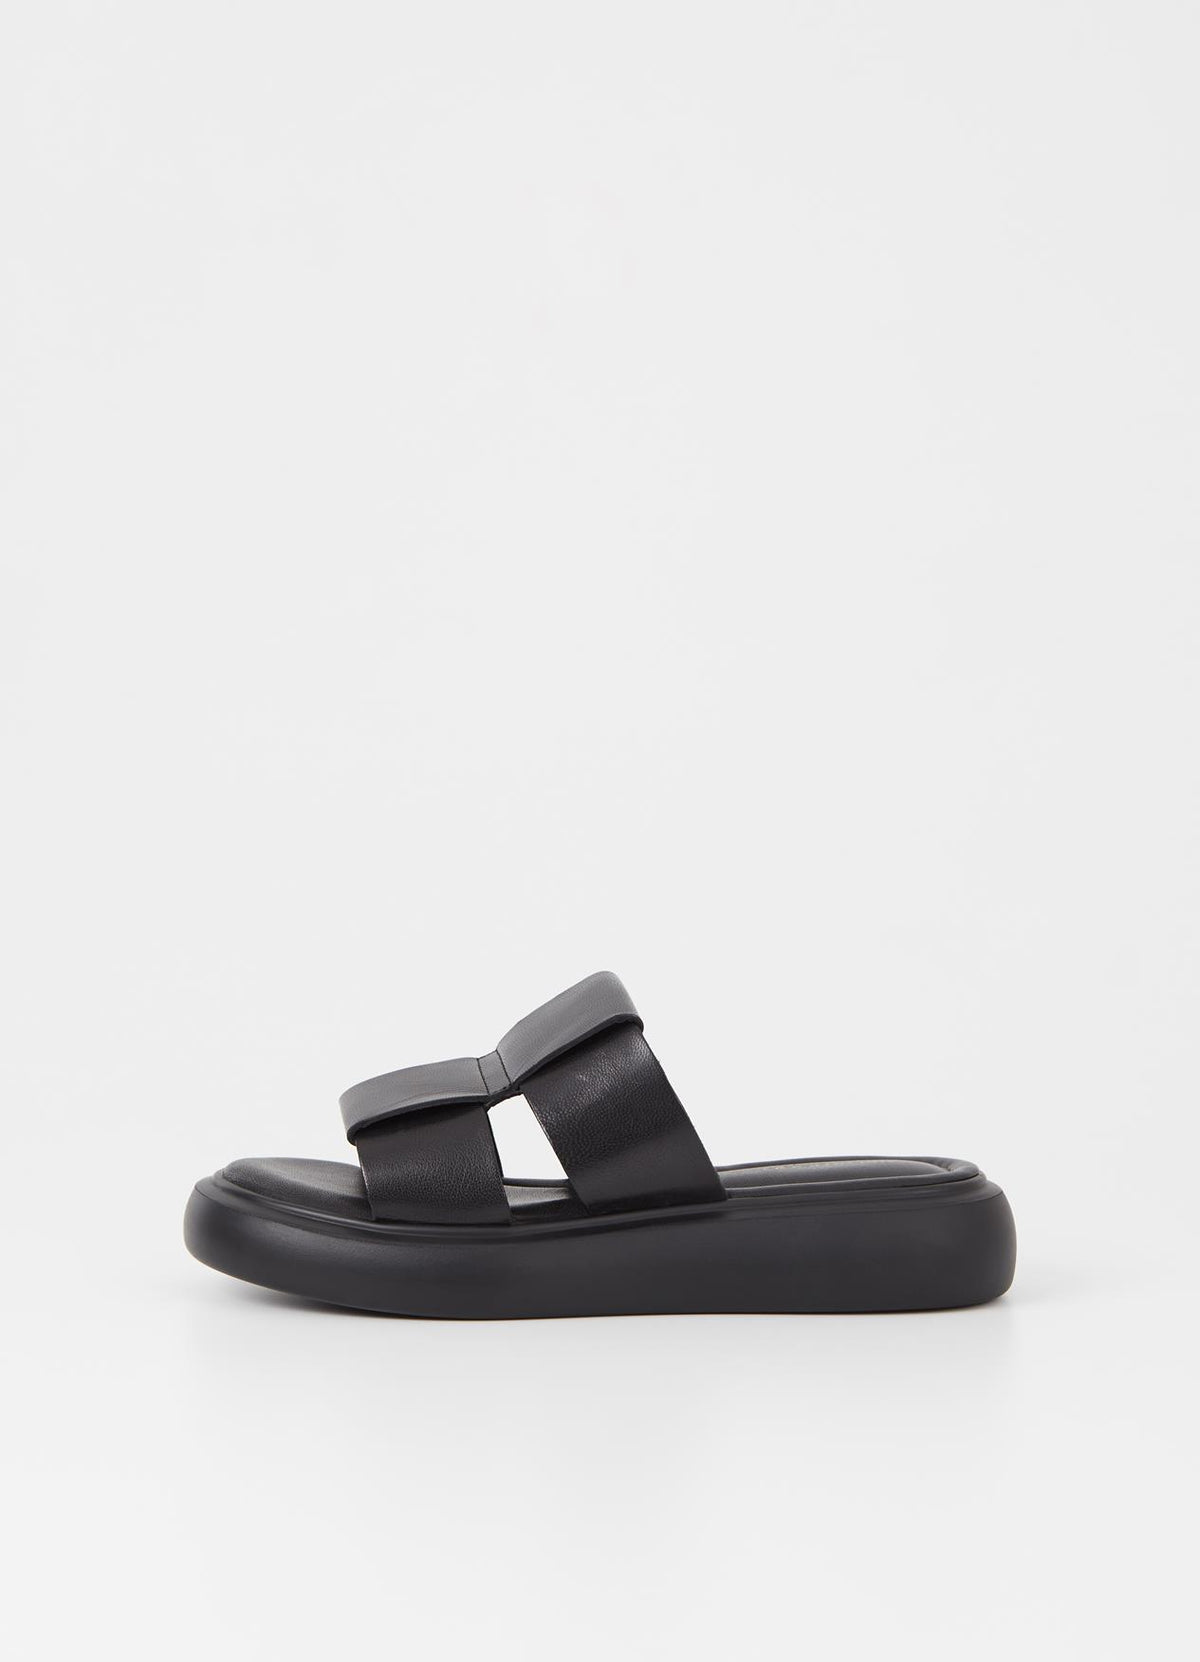 Vagabond woven look Blenda slide black leather | Pipe and Row Seattle ...